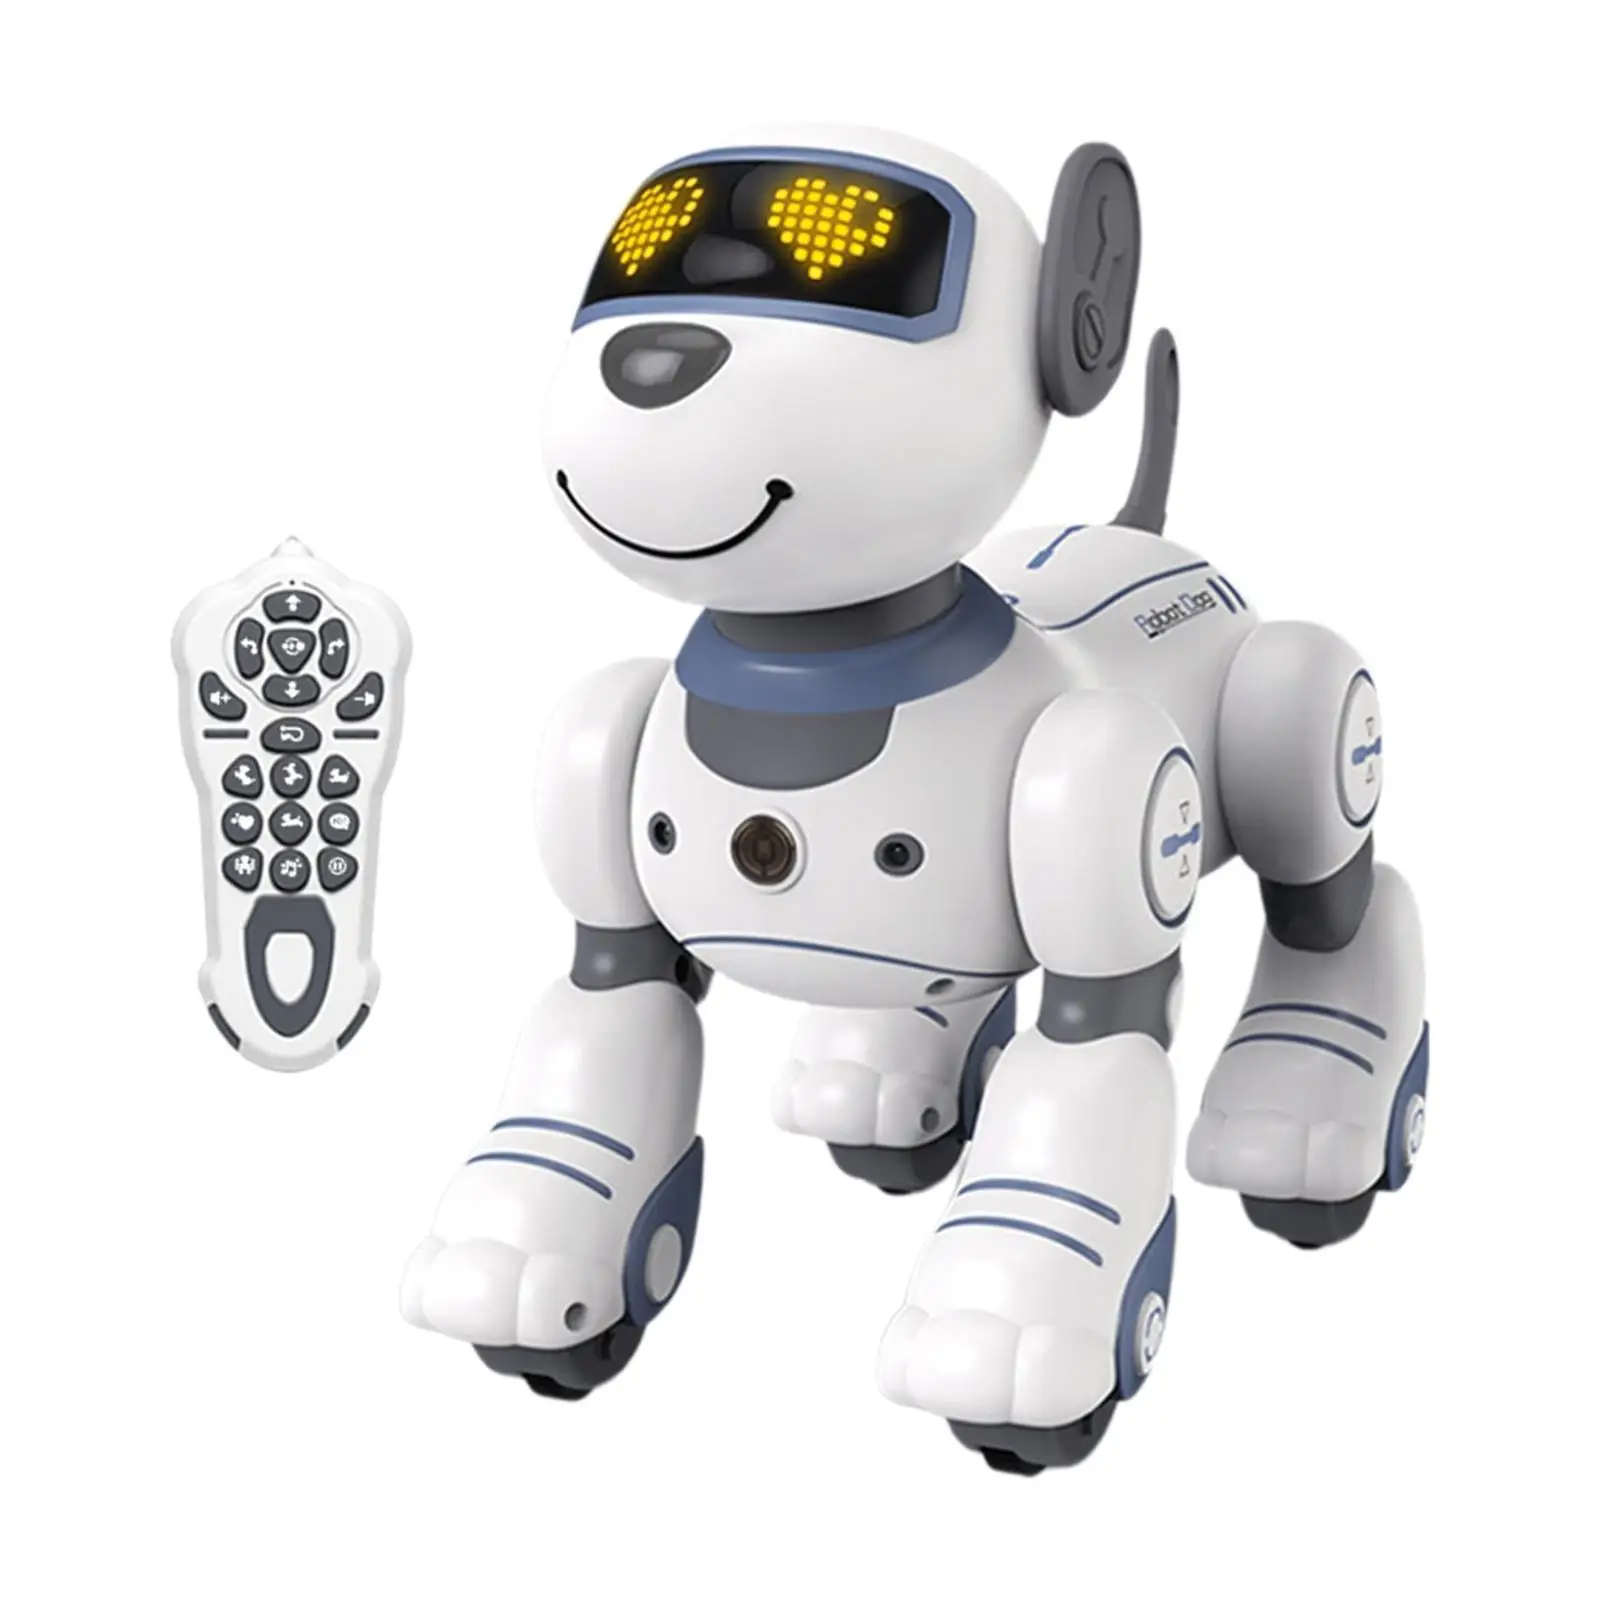 Smart Robot Dog Toys Interactive Play for Boys and Girls Age 5 6 7 8 9 10 Boys Girls